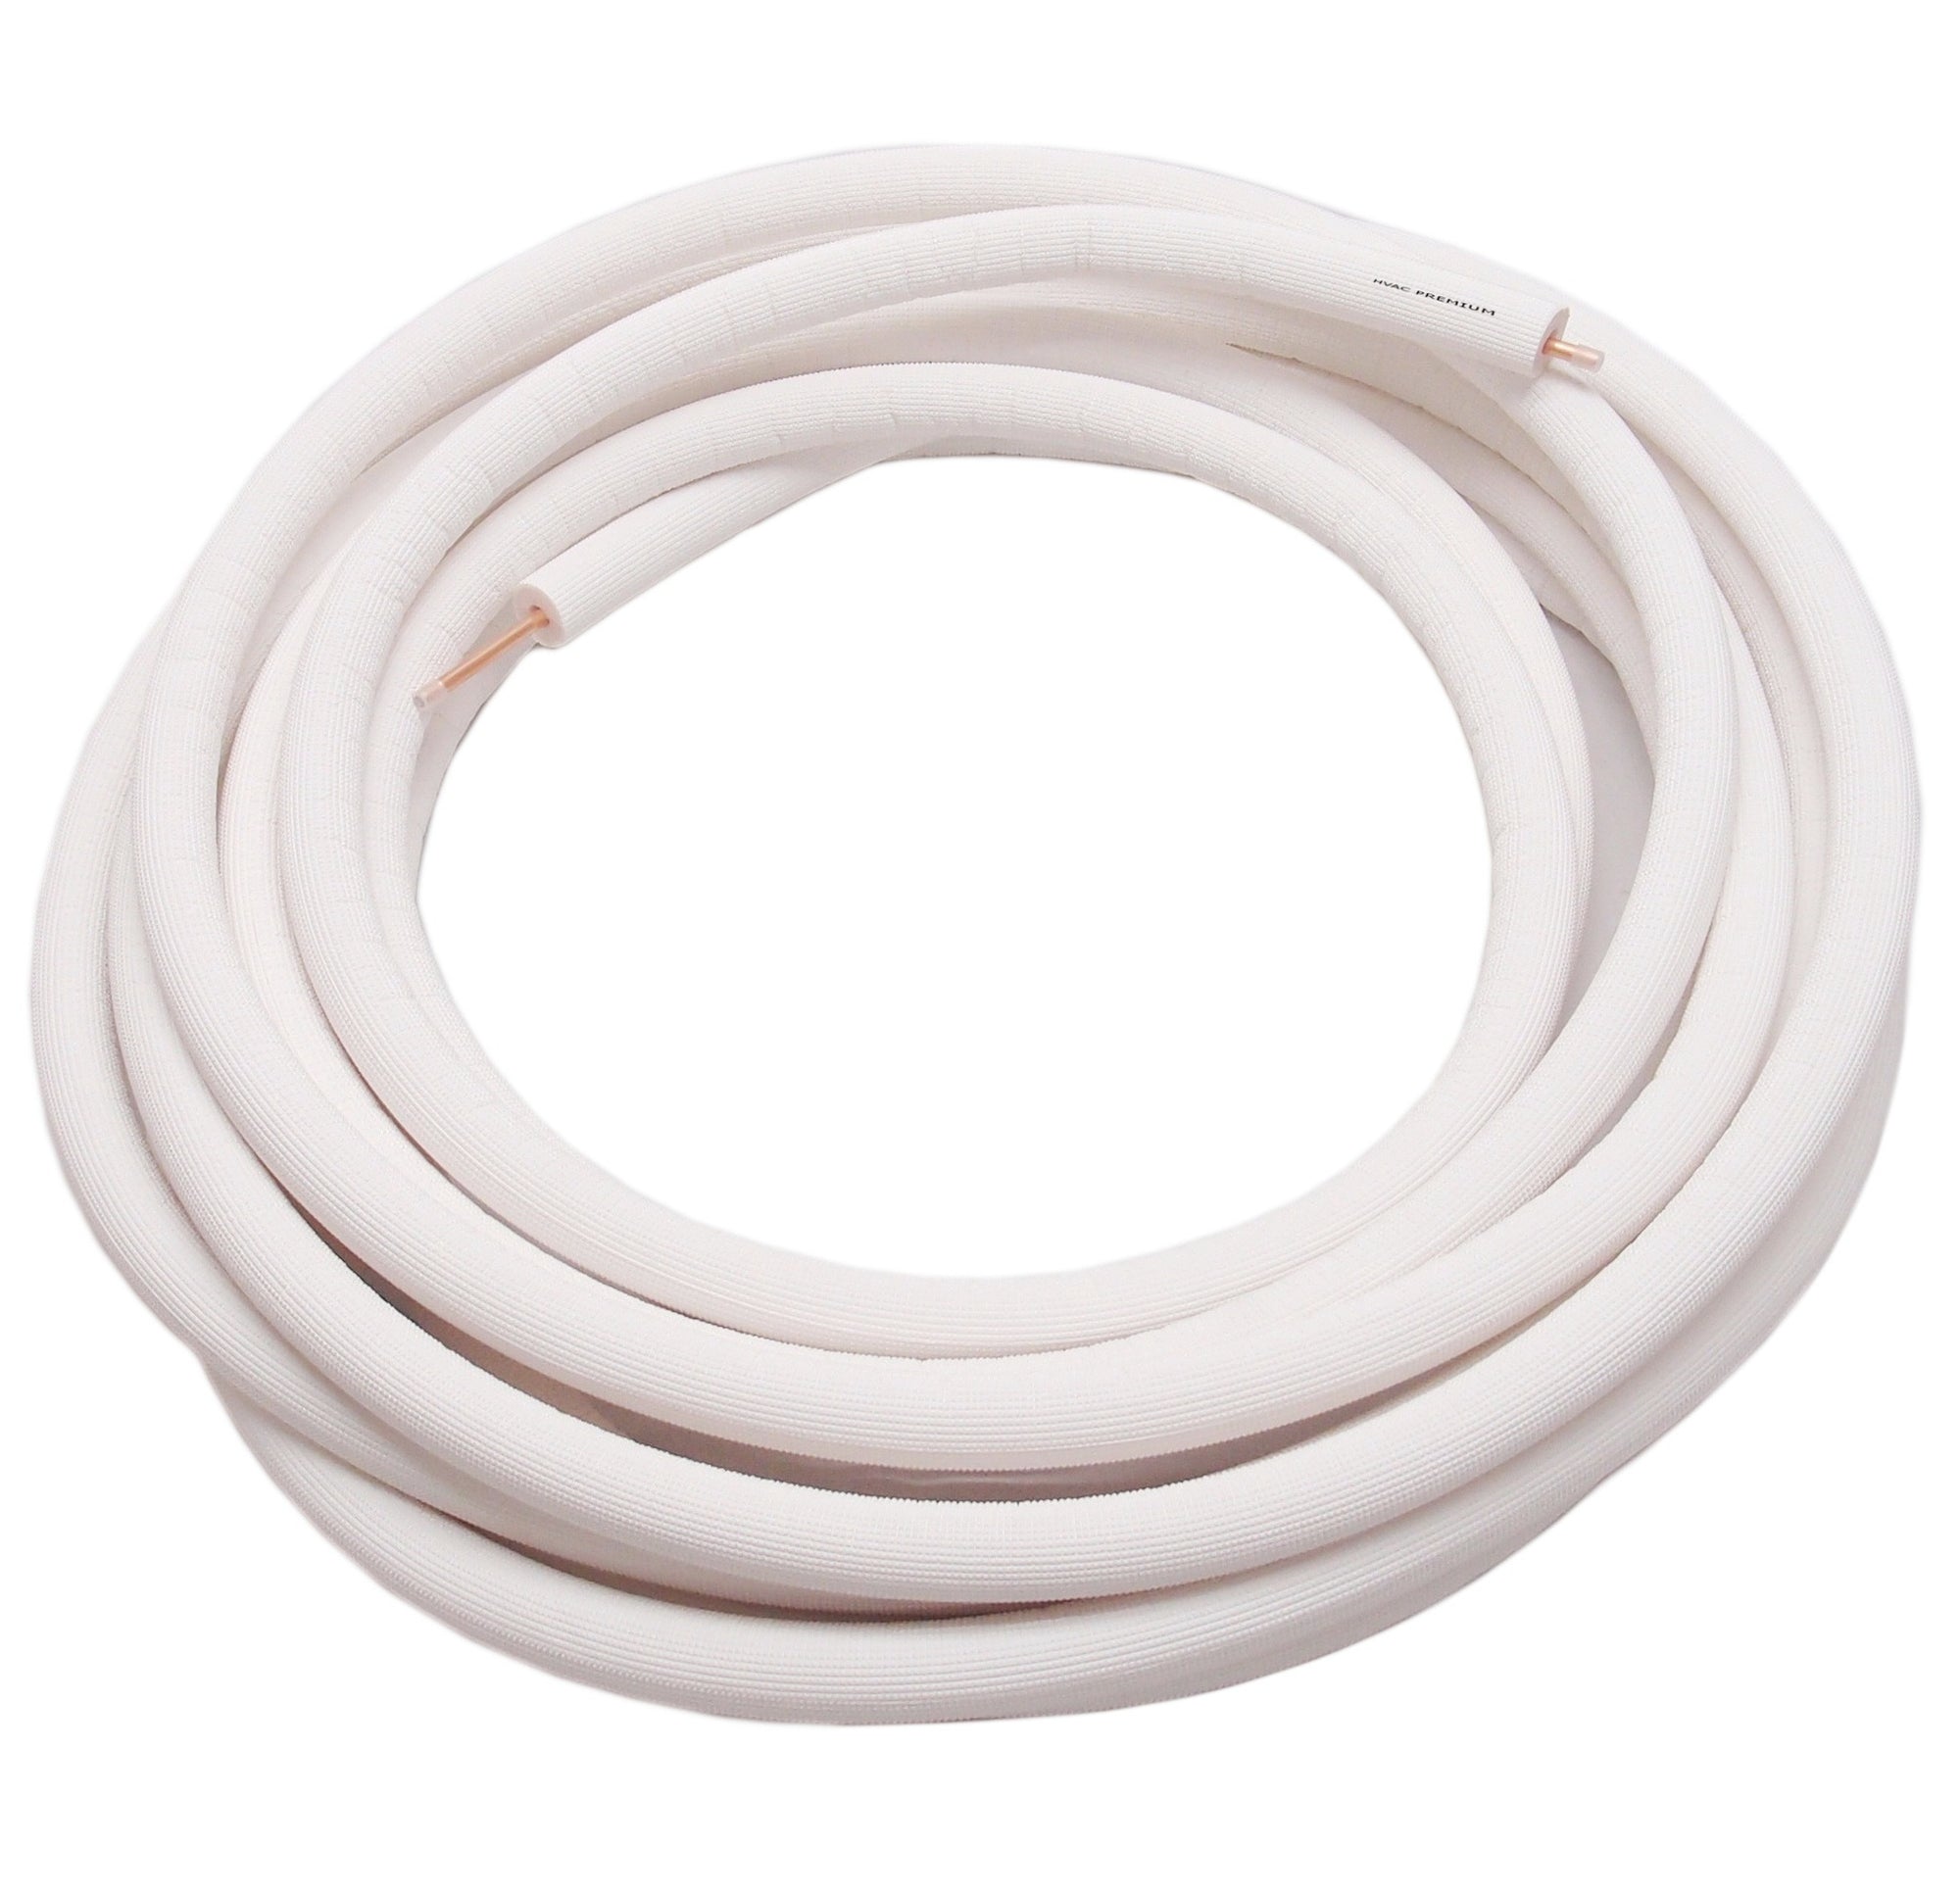 3/4" Insulated Copper Coil Line - Seamless Pipe Tube for HVAC, Refrigerant - 1/2" White Insulation - 25' Long